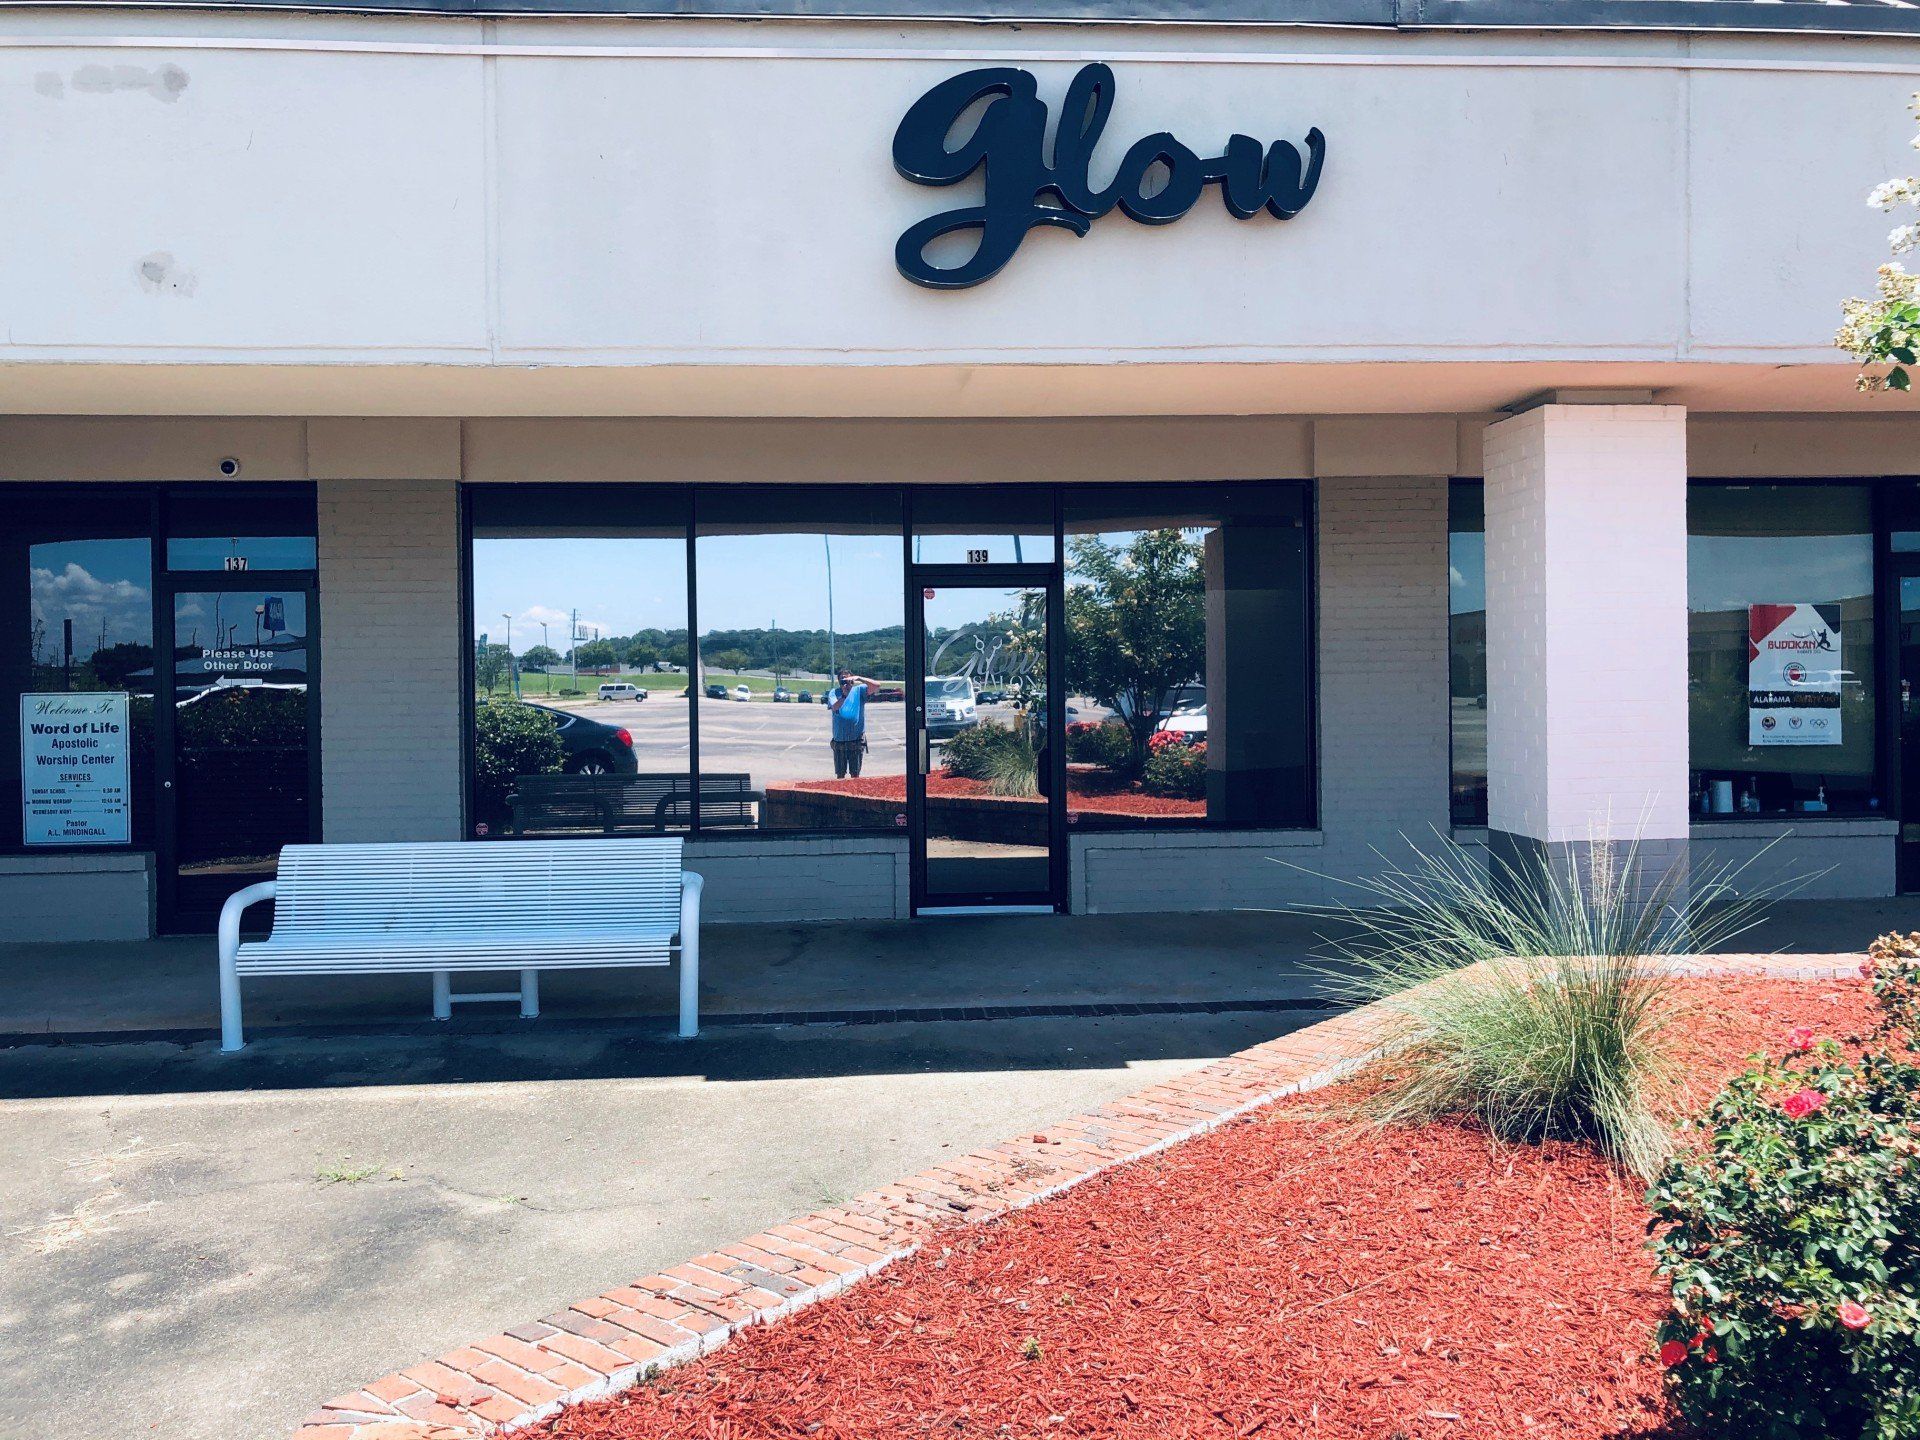 spf business tint in Montgomery AL - Heat & Glare have been stopped from disrupting the work flow inside Glow Salon in Montgomery, AL